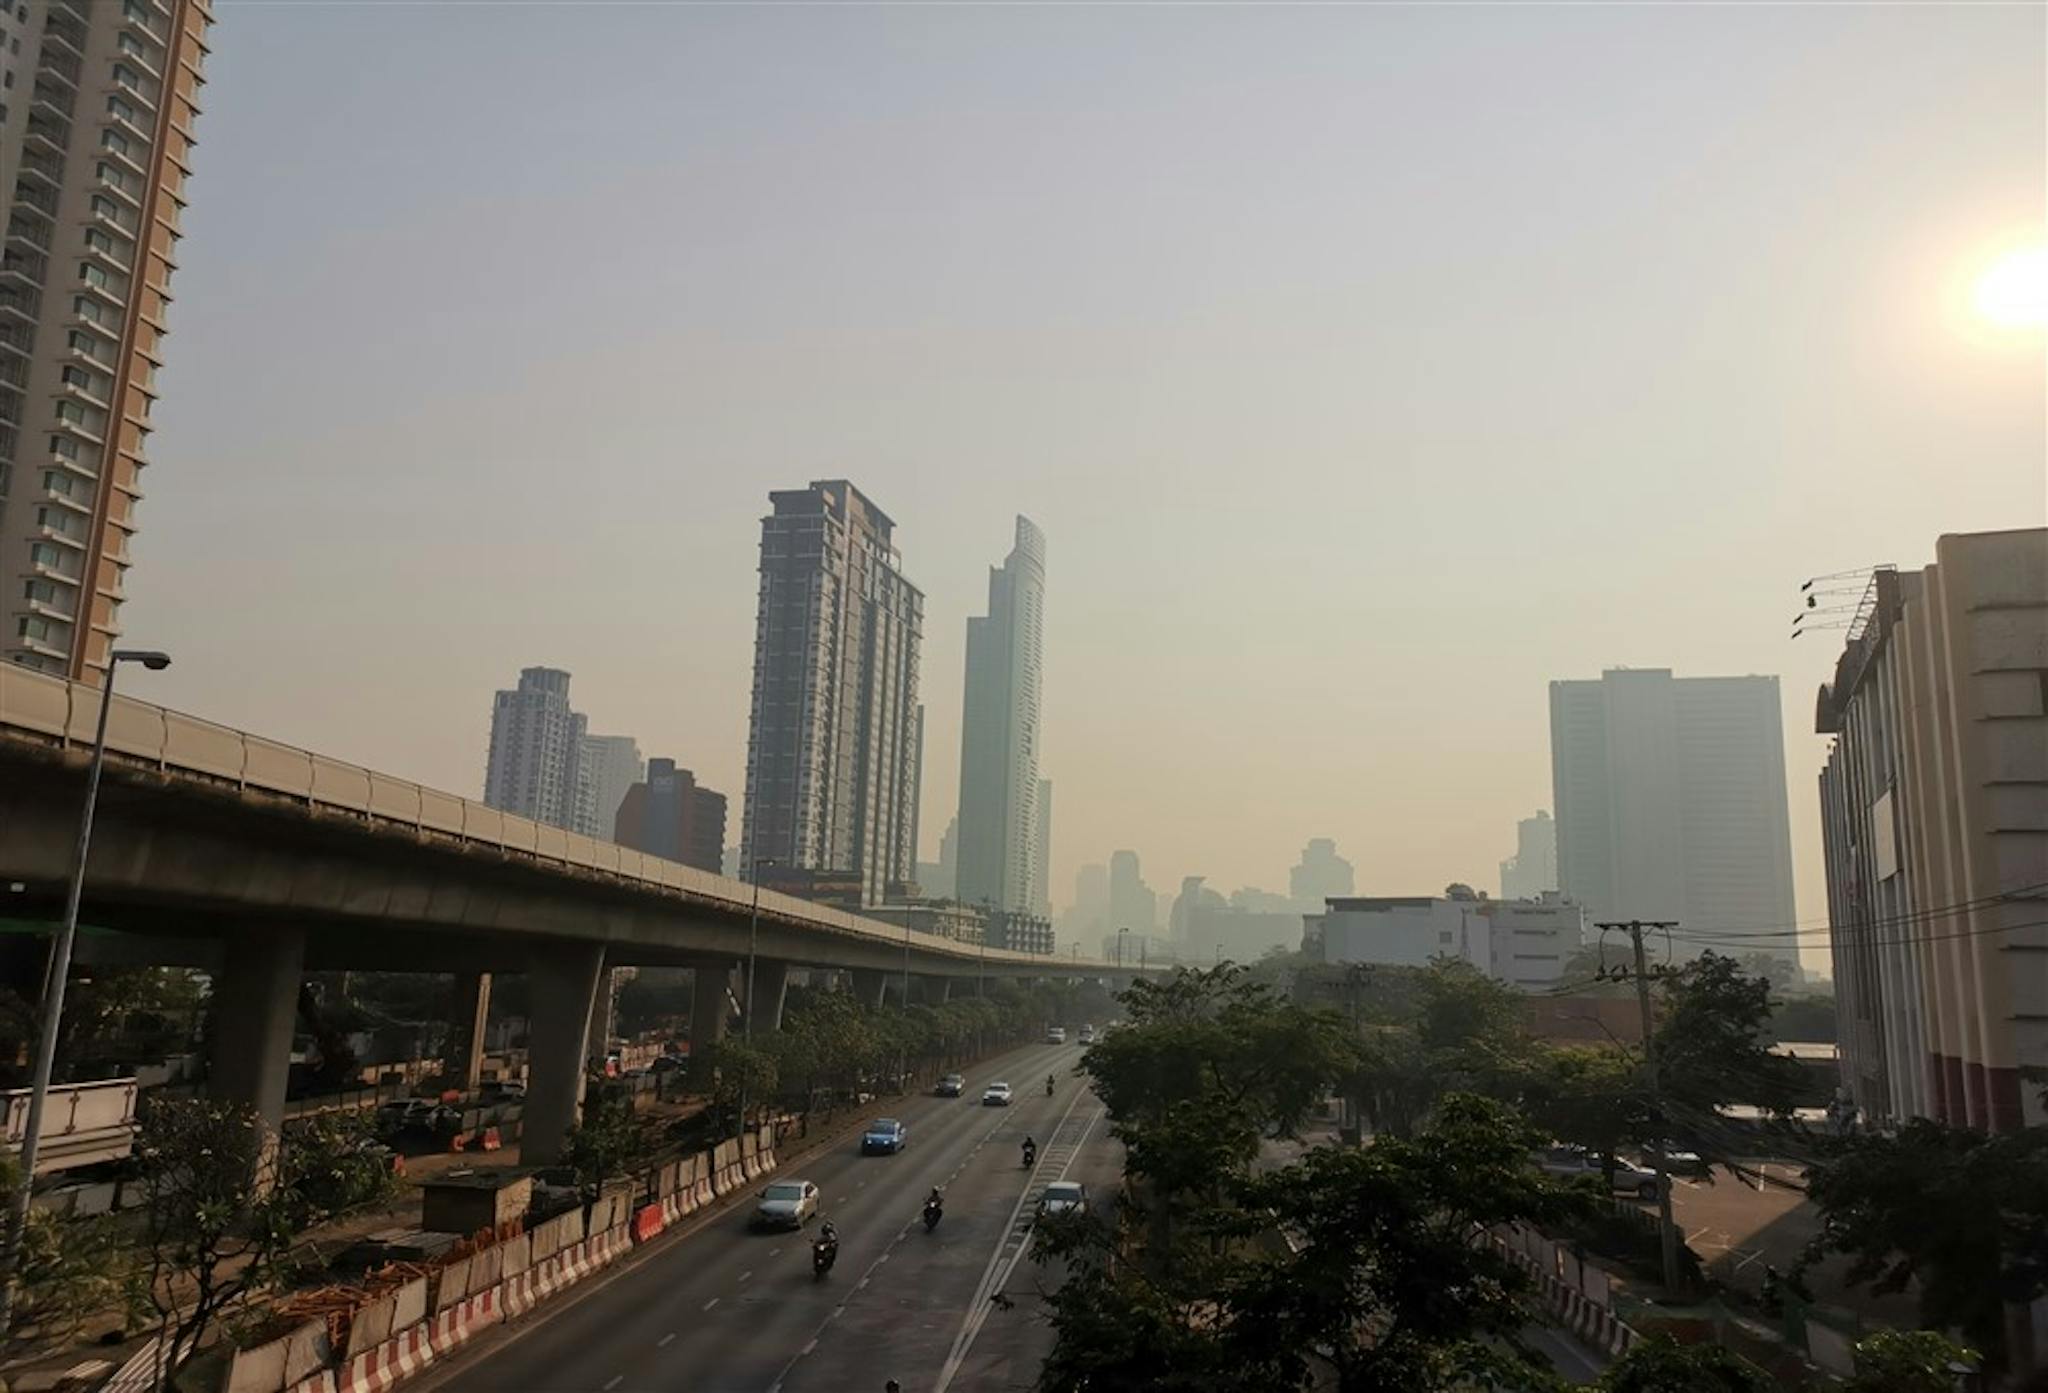 Smog over an Asian city caused by a combination of vehicle exhaust and industrial pollutants.